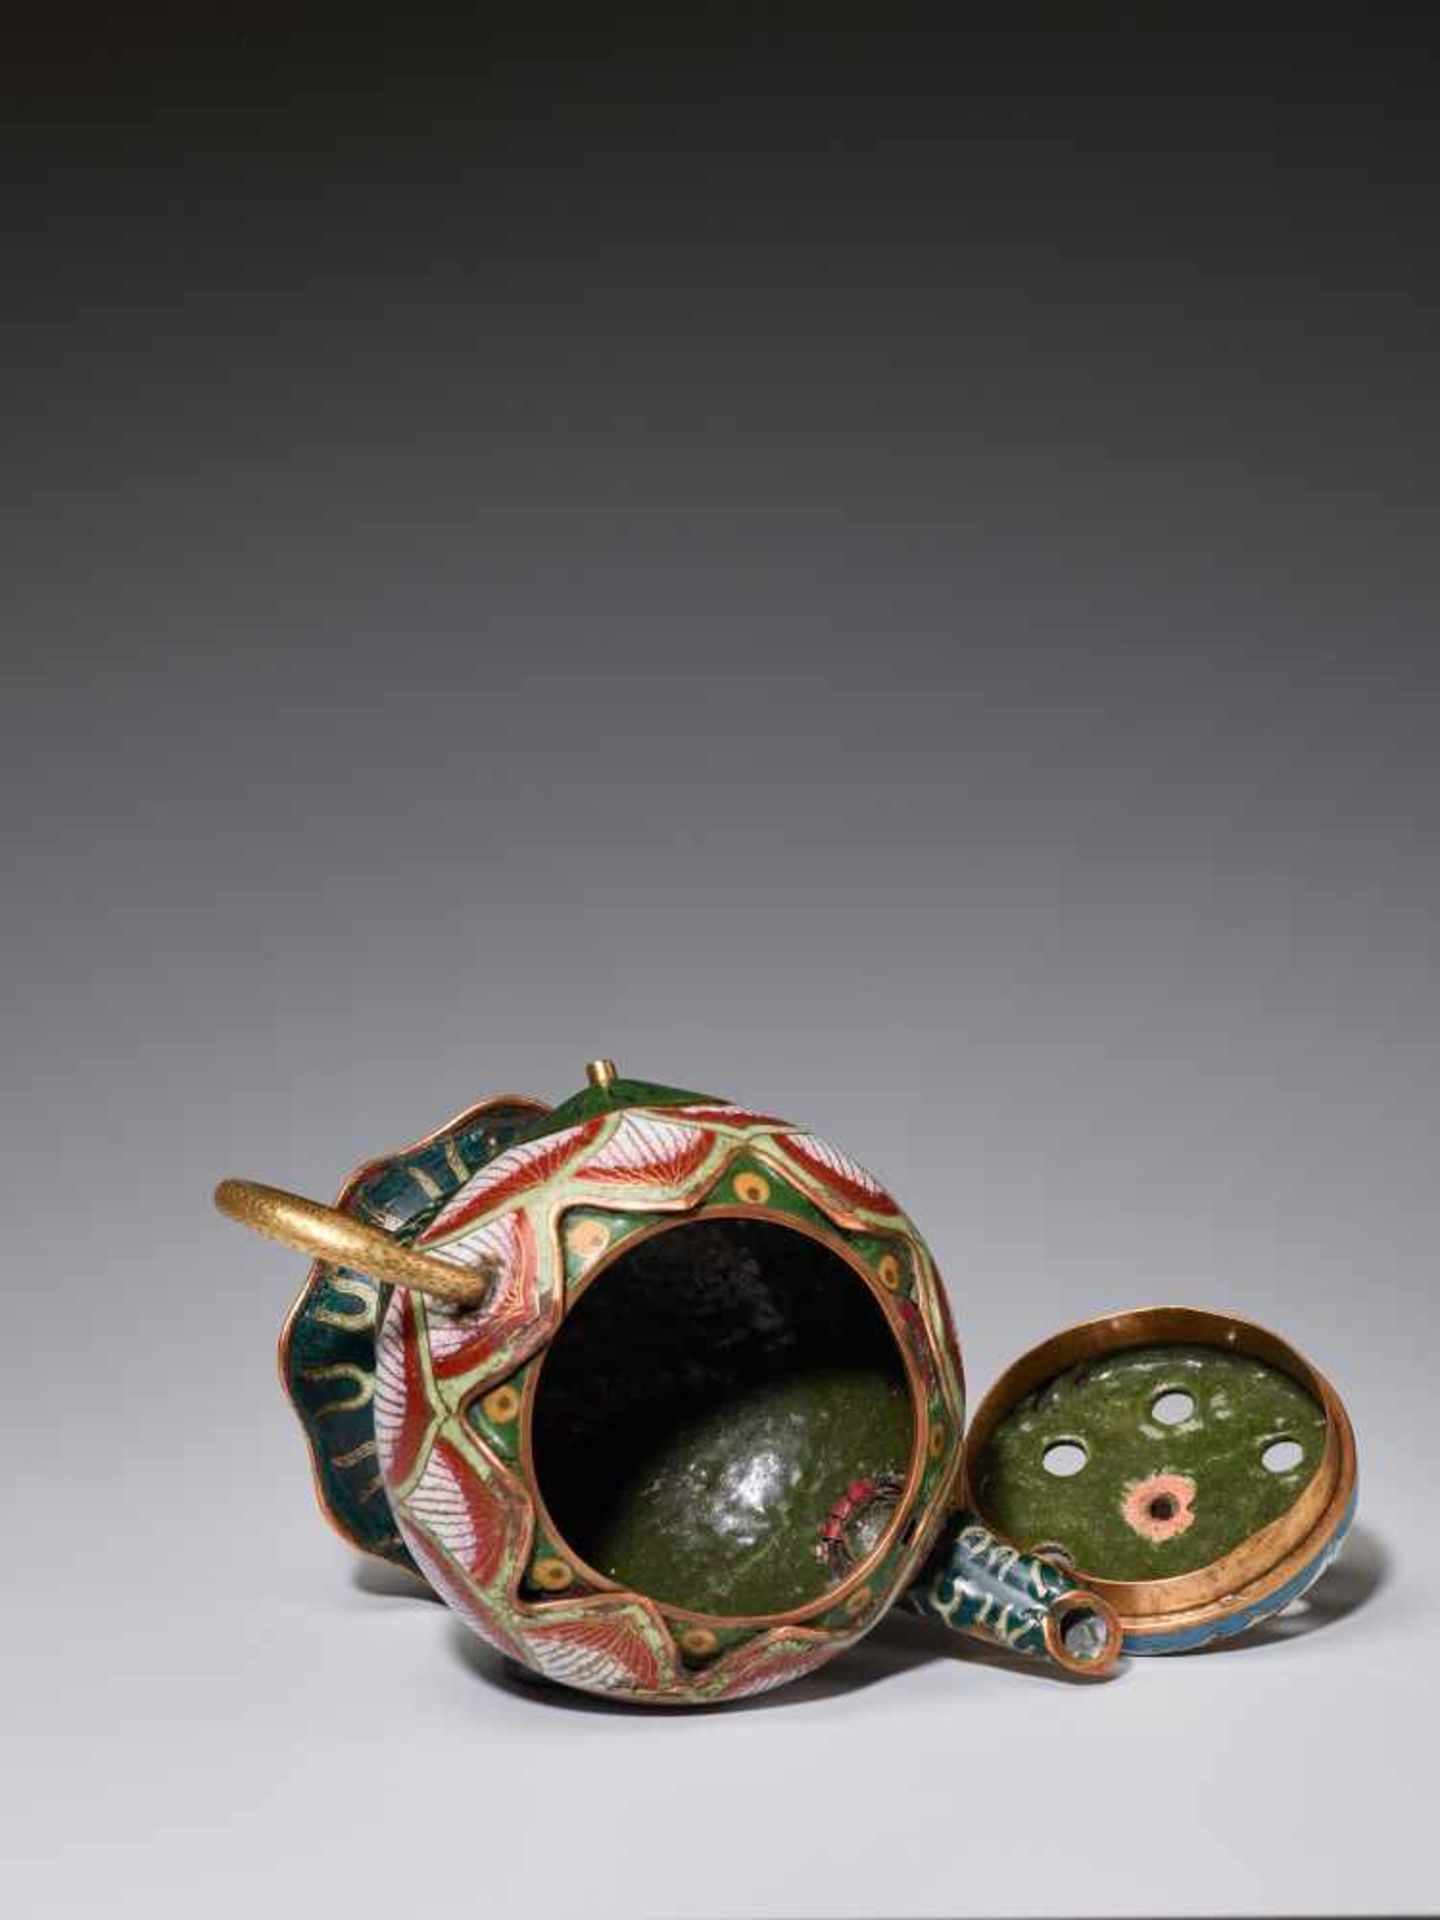 A EXTREMELY RARE CLOISONNE ENAMEL LOTUS-LEAF FORM EWER, 18TH CENTURYFire gilt and incised bronze, - Image 6 of 11